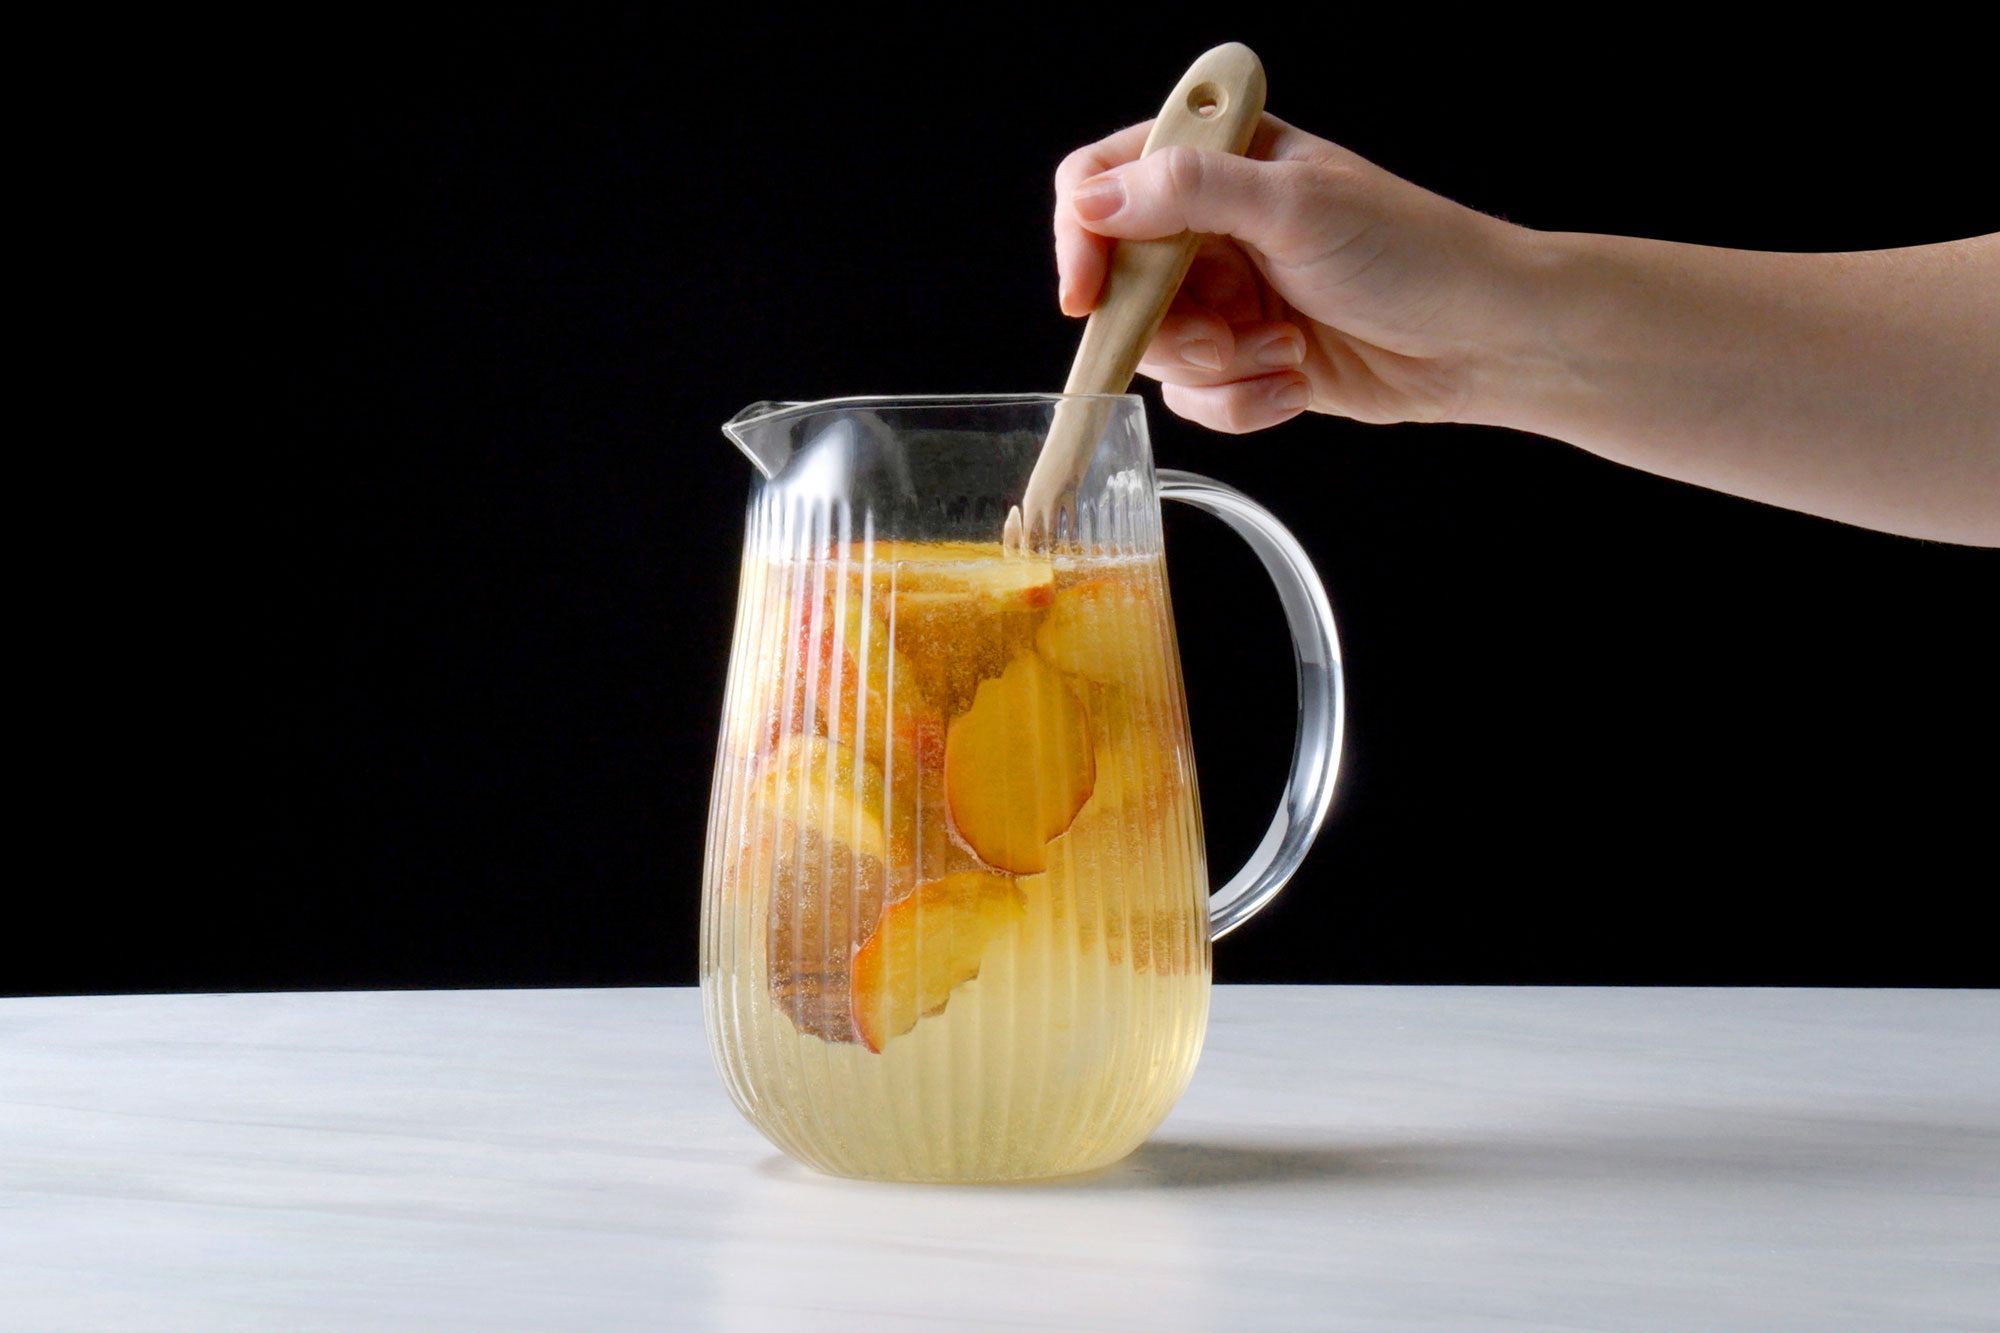 Stirring peach sangria with a wooden spoon